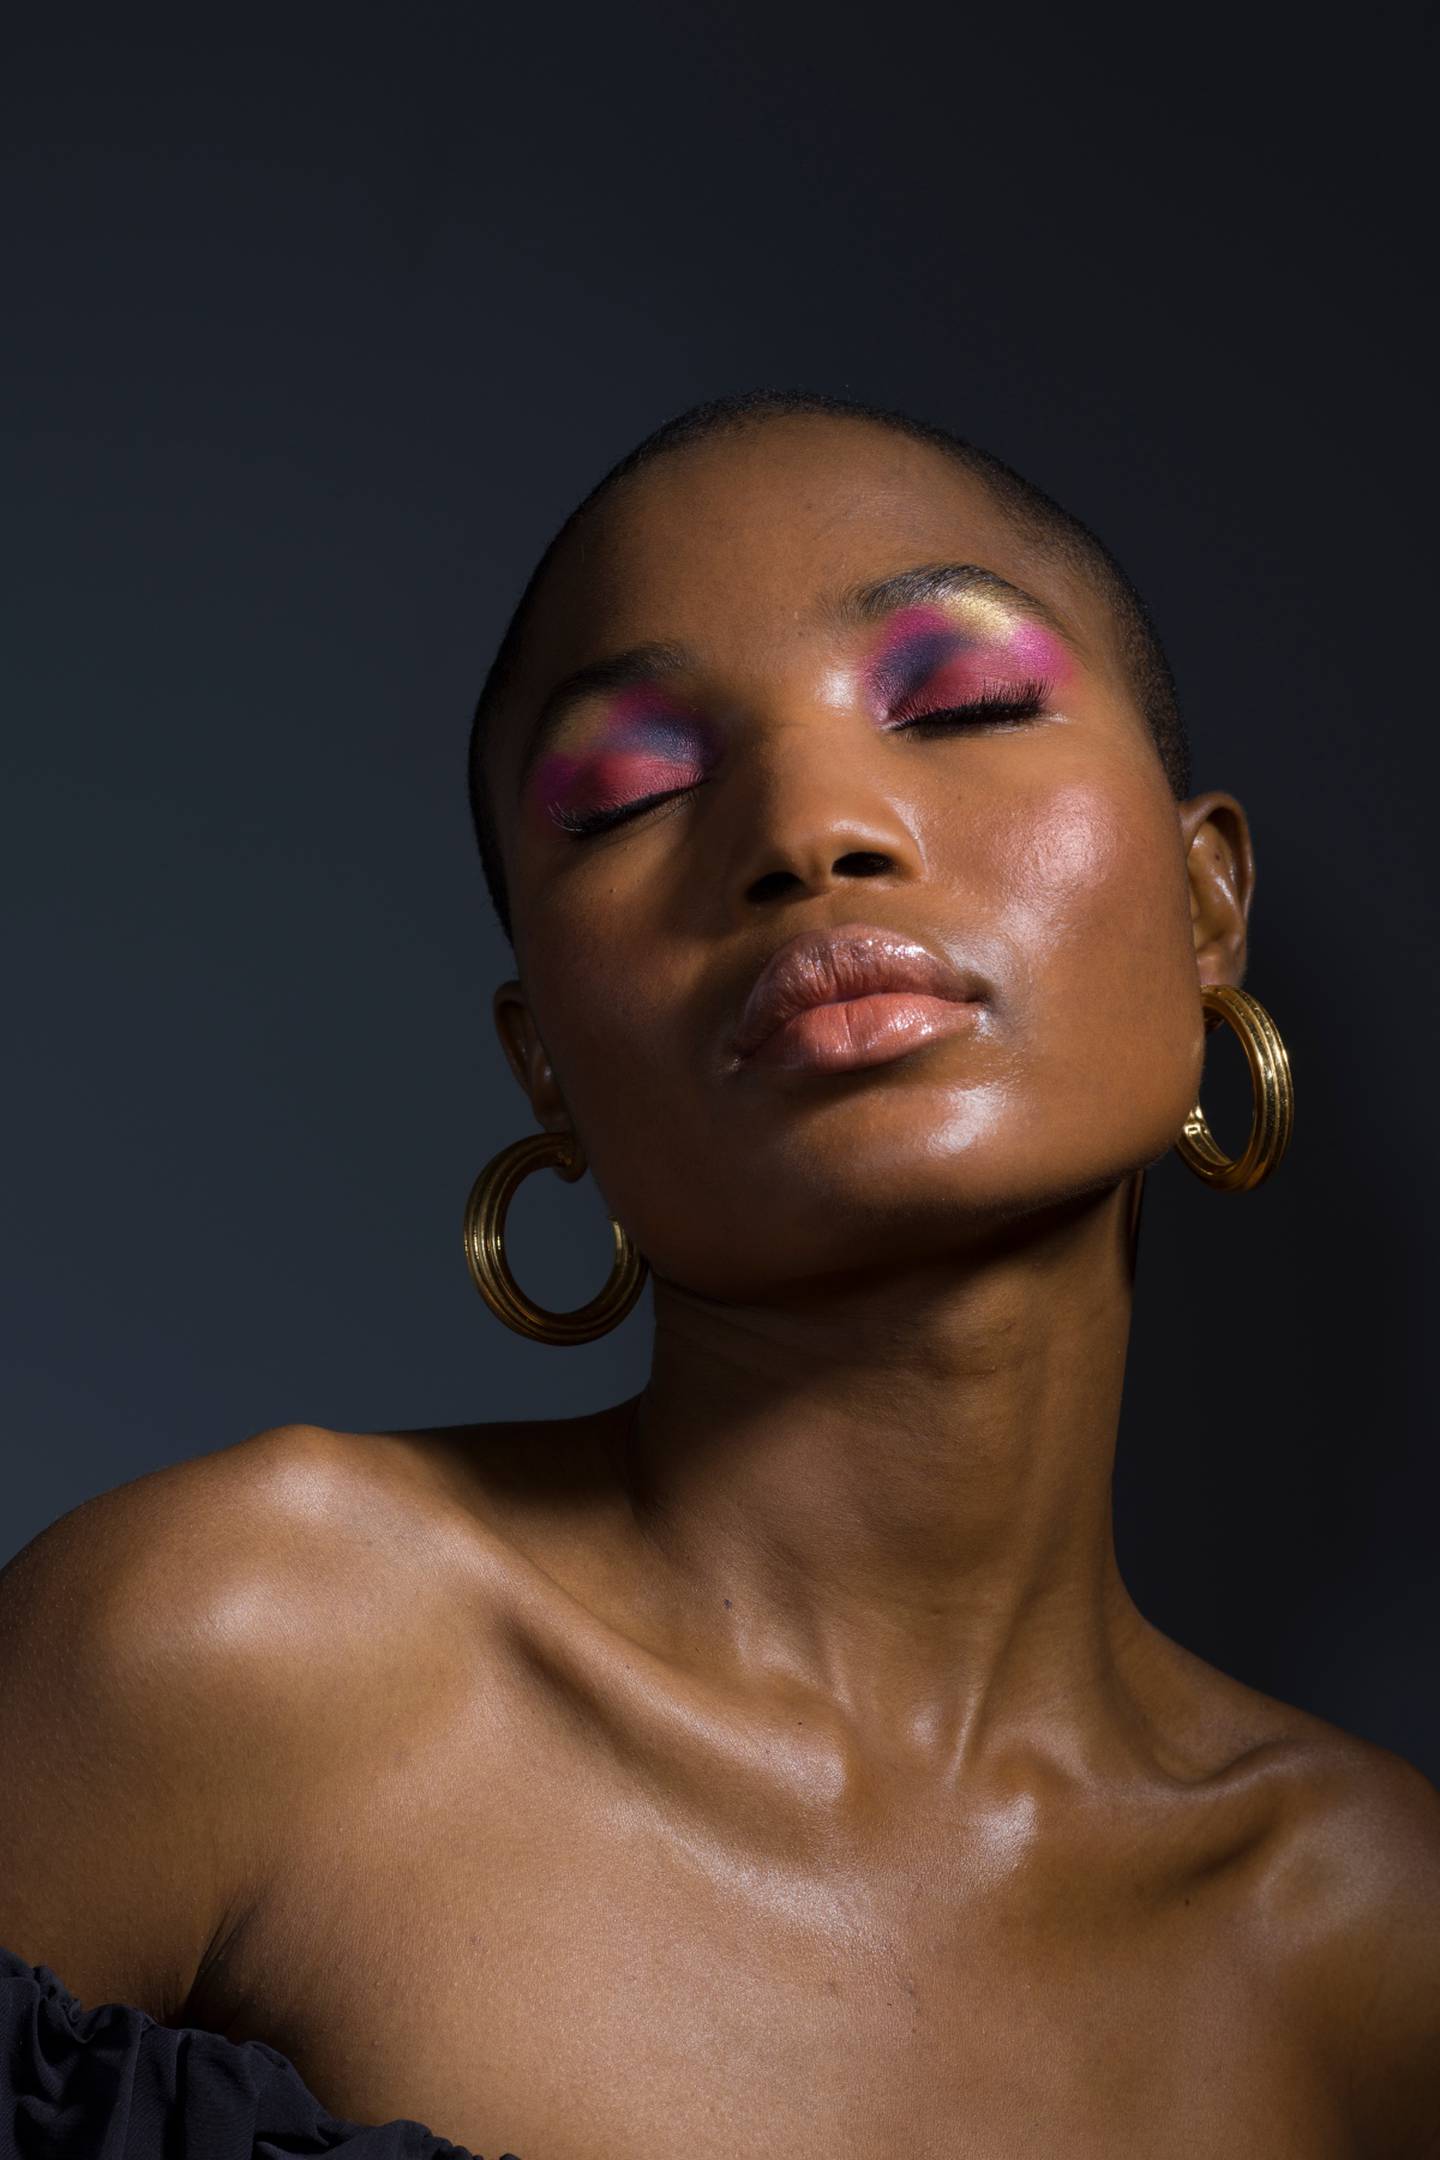 Black beauty brands are embracing new methods of selling — and starting their own — to connect with consumers.